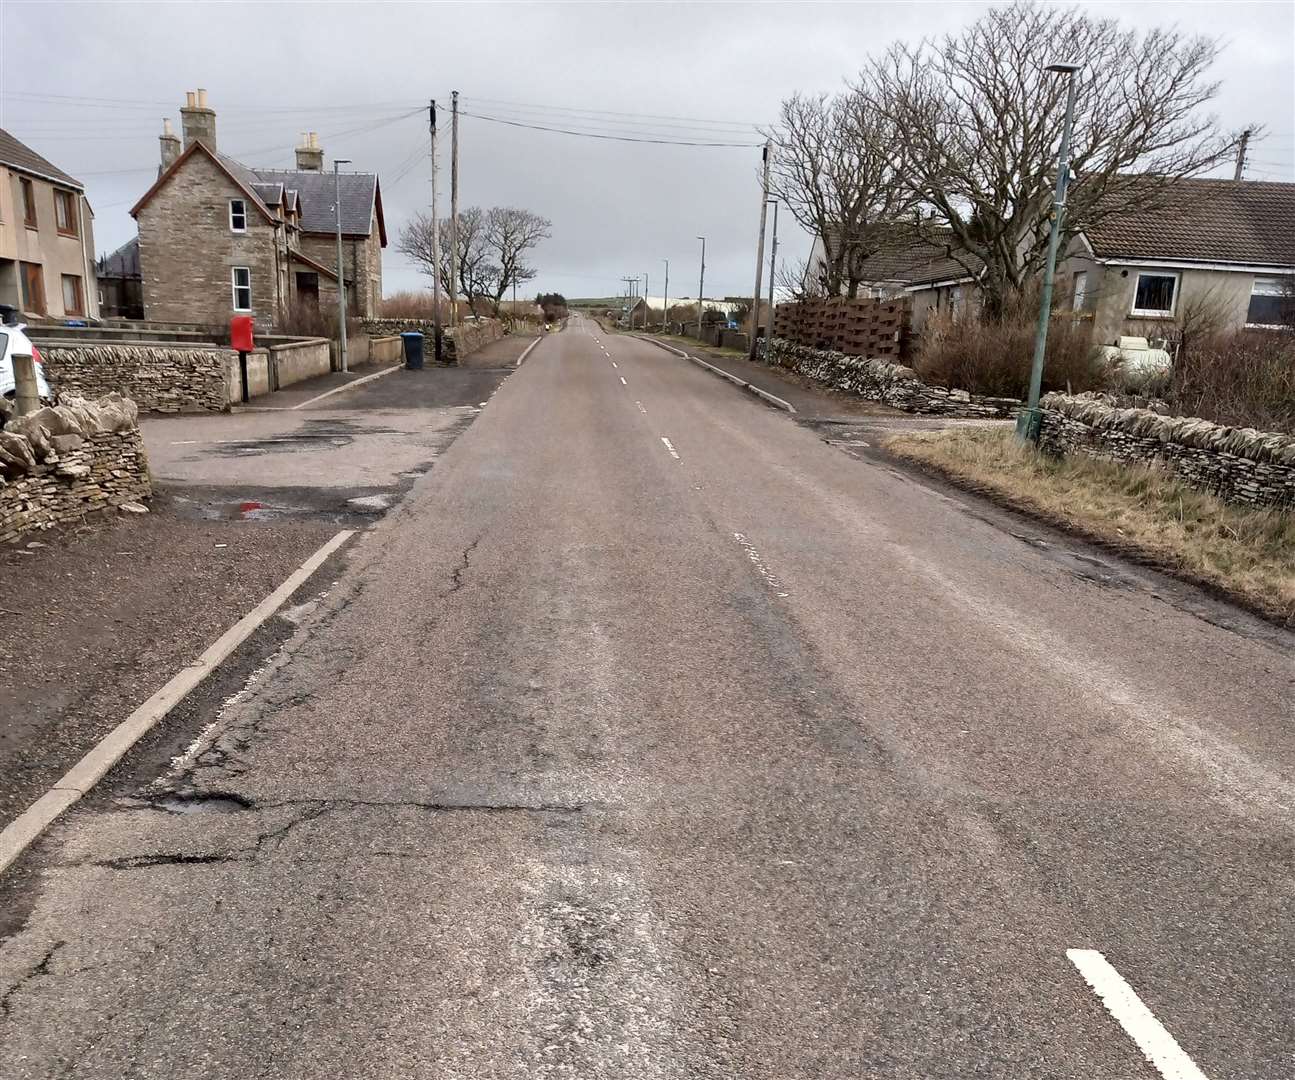 There have been long-standing safety concerns over the Forss straight on the A836 between Thurso and Dounreay.